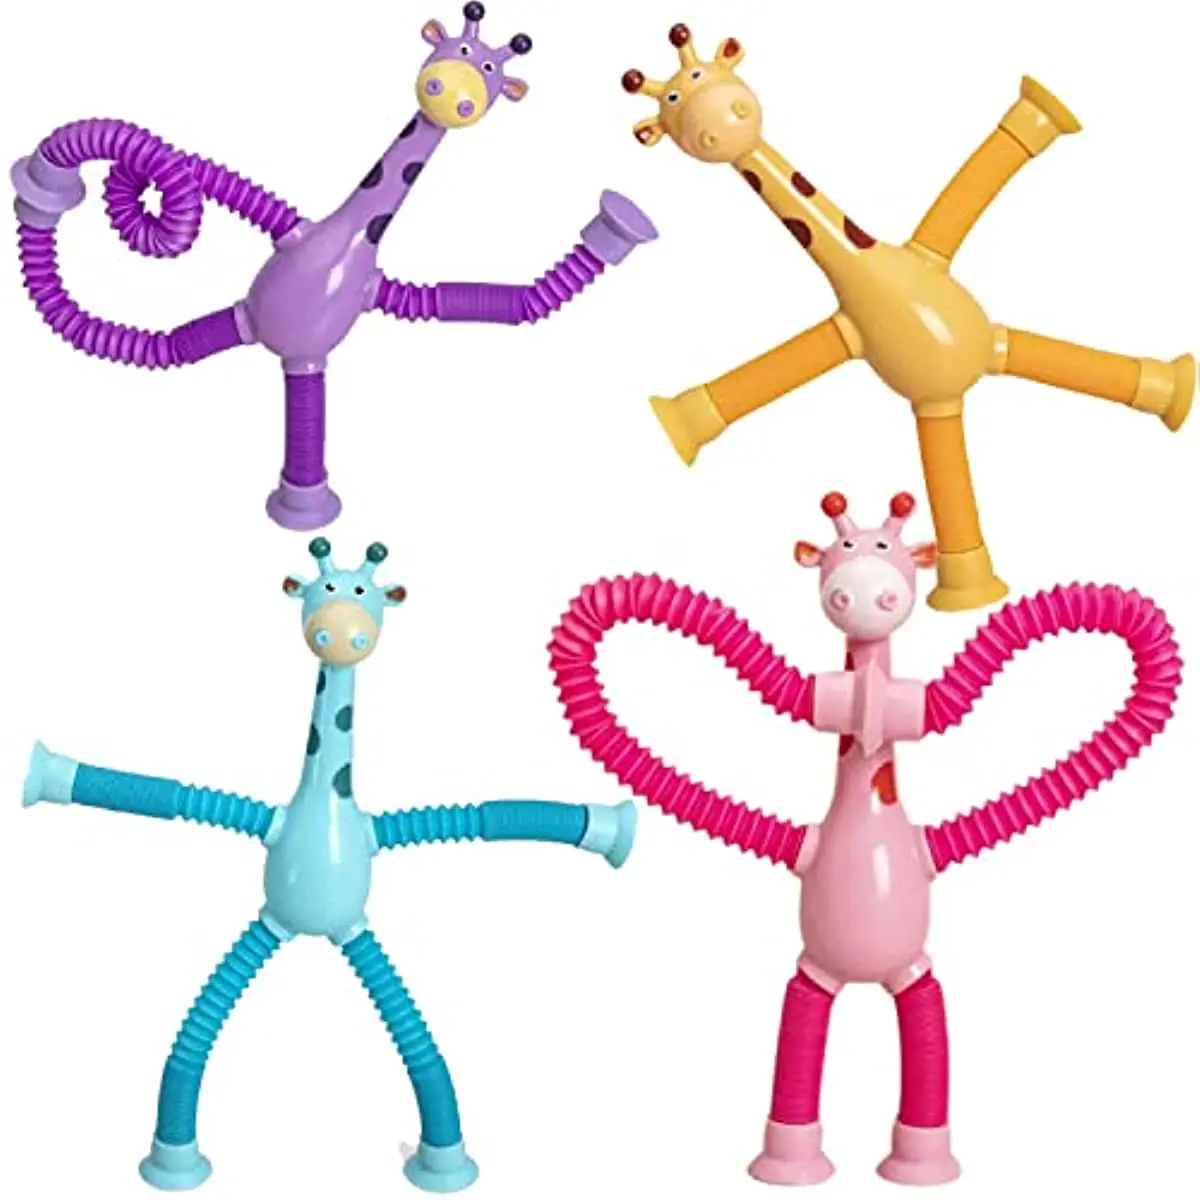 4 Pcs Telescopic Suction Cup Giraffe Toy Cartoon Puzzle Suction Cup Parent-Child Interactive Decompression Toy Stress Relief